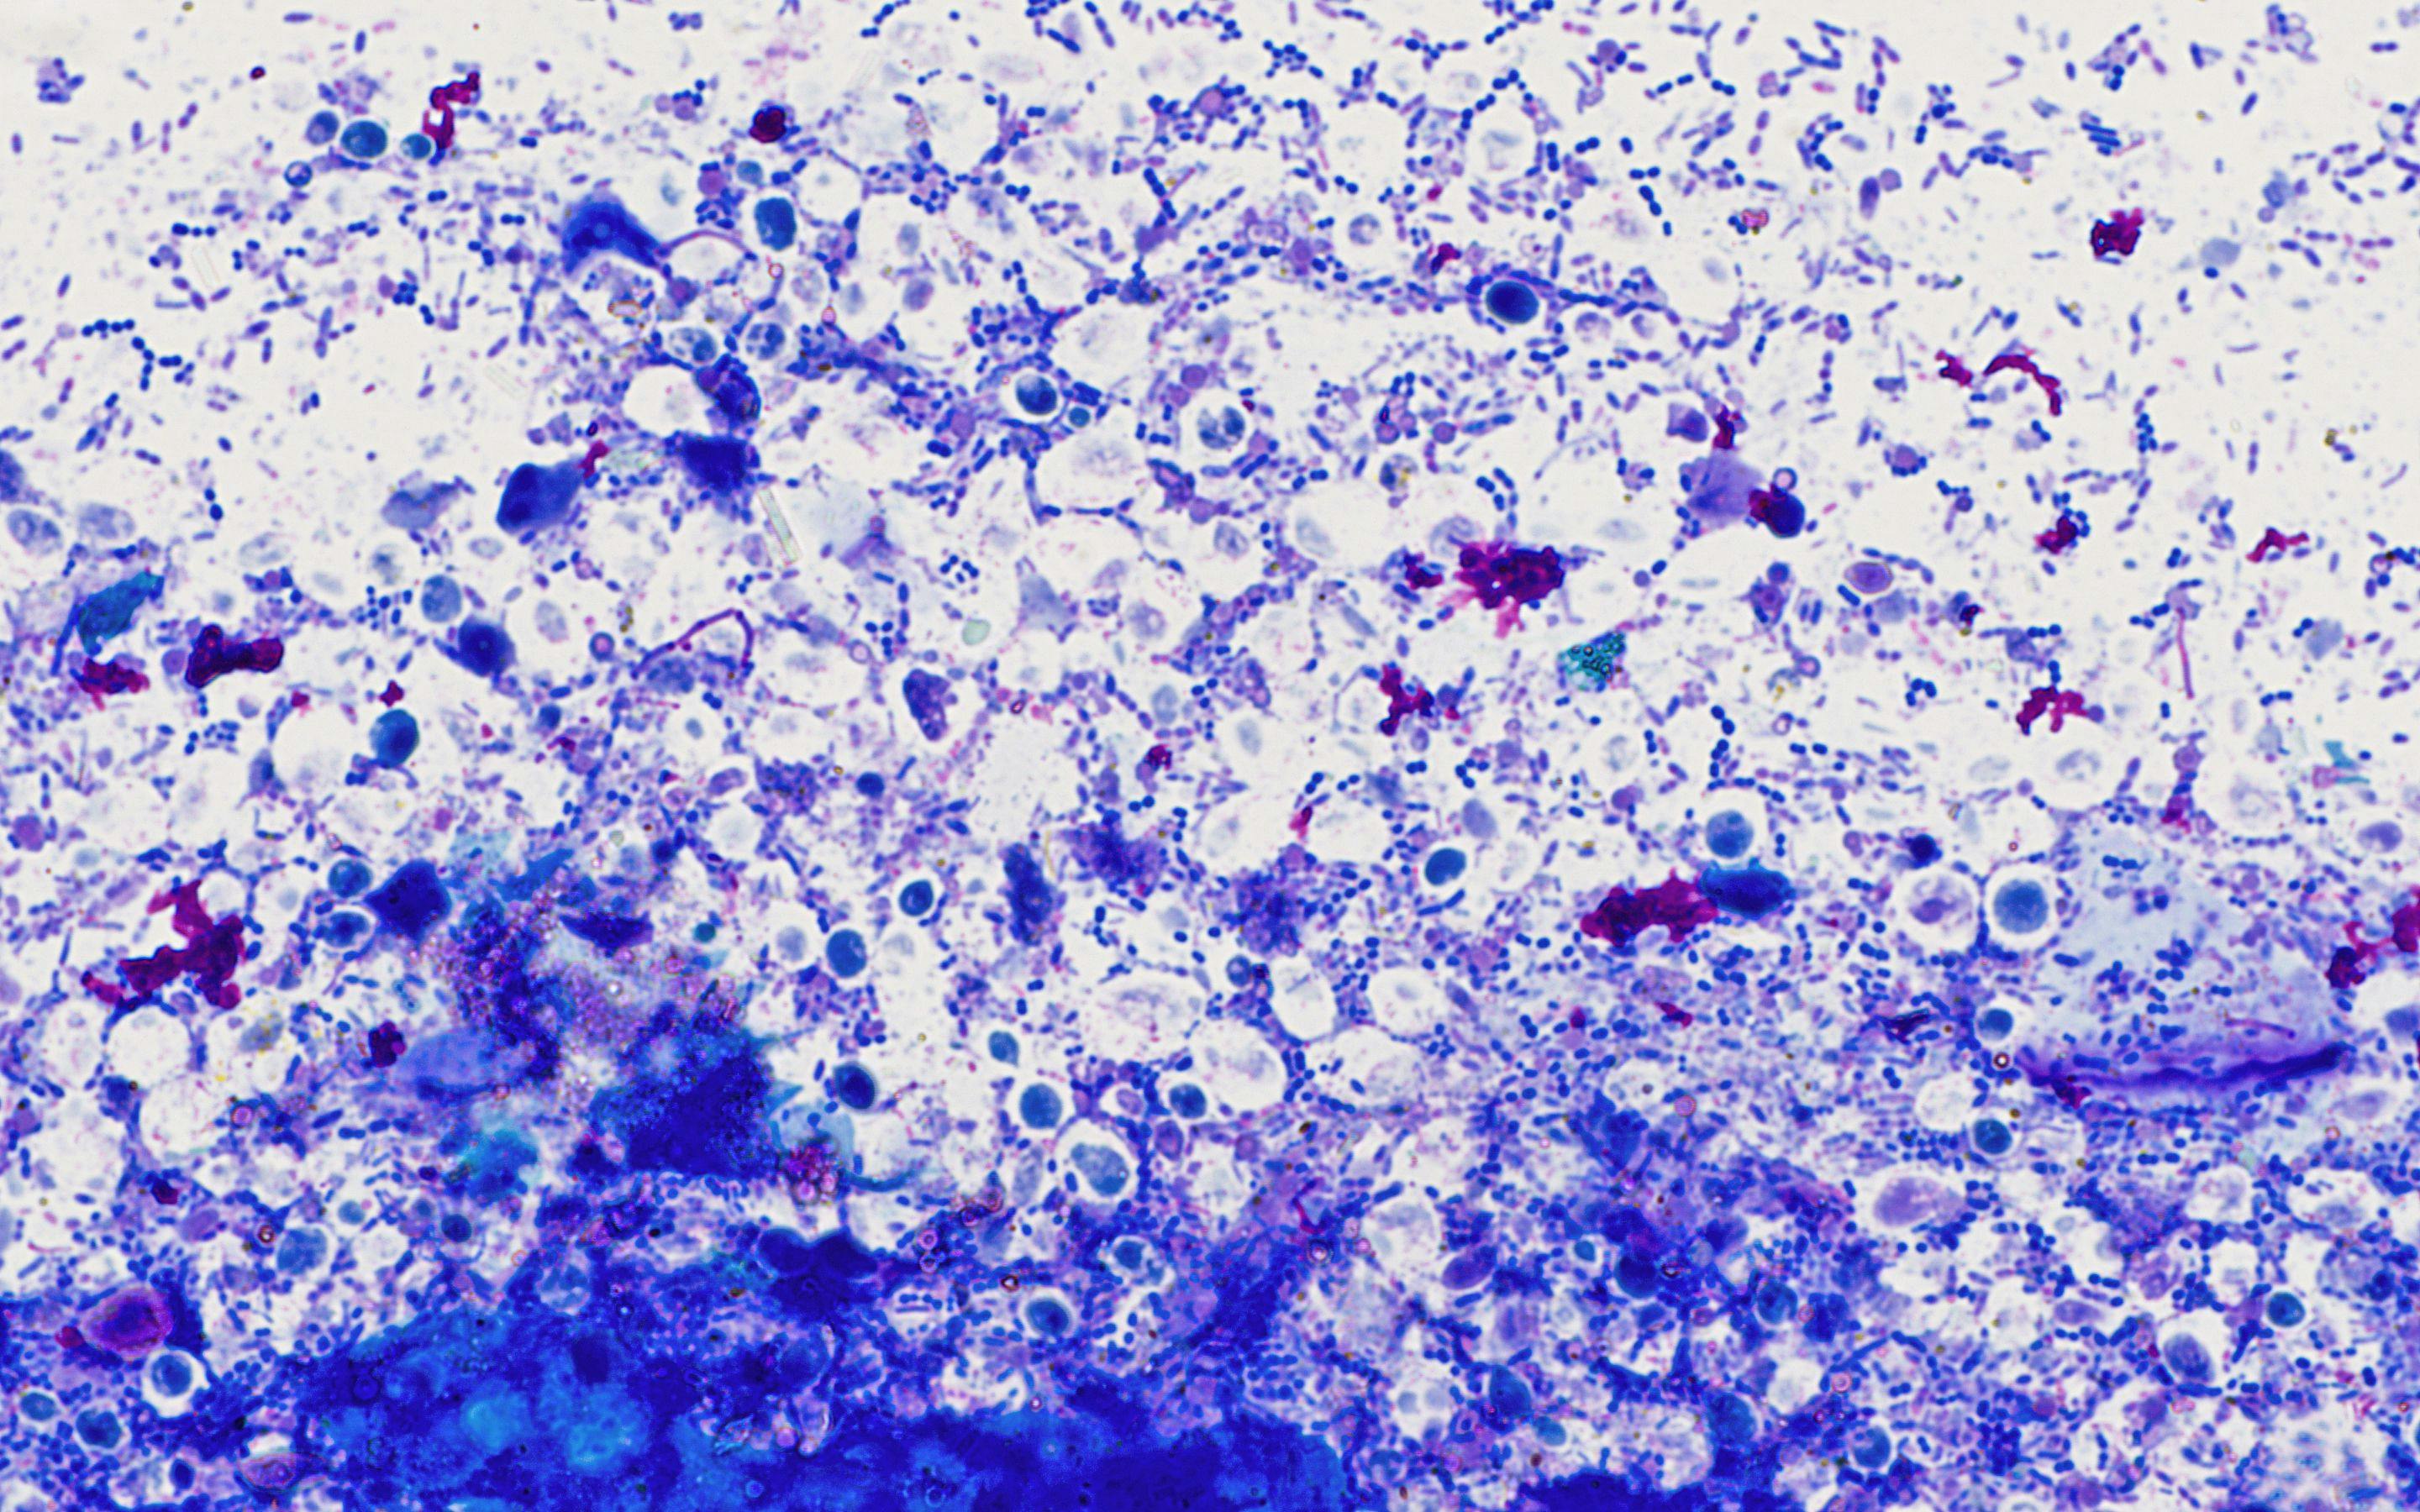 Figure 2. Rectal scrape from a 1-year-old, spayed female, mixed breed dog presented for evaluation of chronic diarrhea. There is an impressive number of fecal yeast and bacterial cocci are overrepresented, consistent with dysbiosis. The dog was undergoing antibiotic therapy and receiving probiotics, both known contributors of yeast overgrowth. Wright-Giemsa, 1000x magnification.